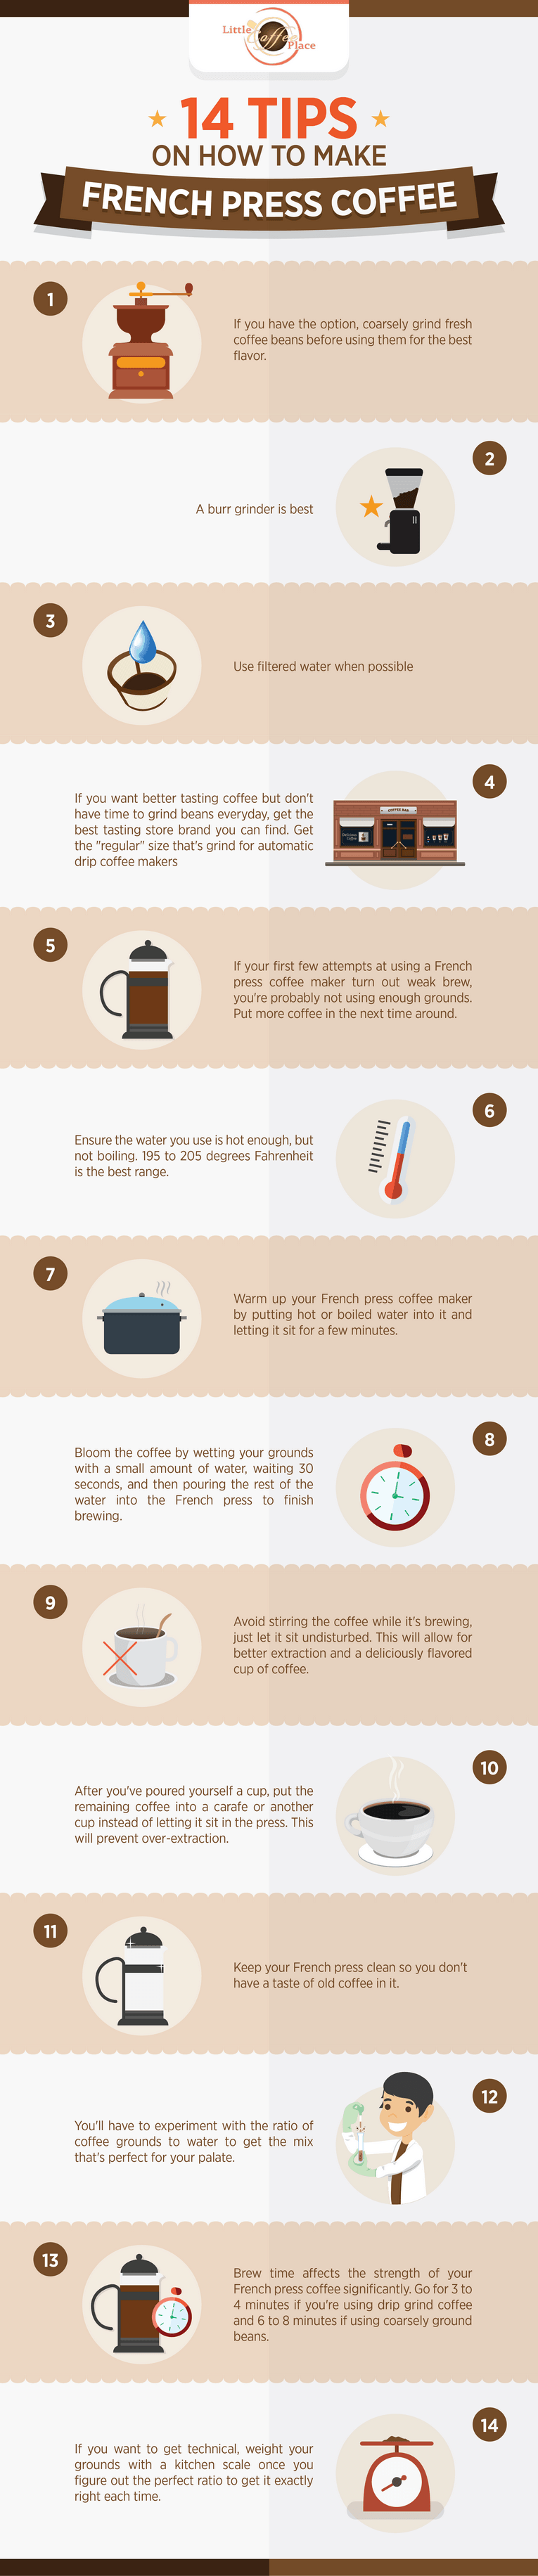 French Press Tips